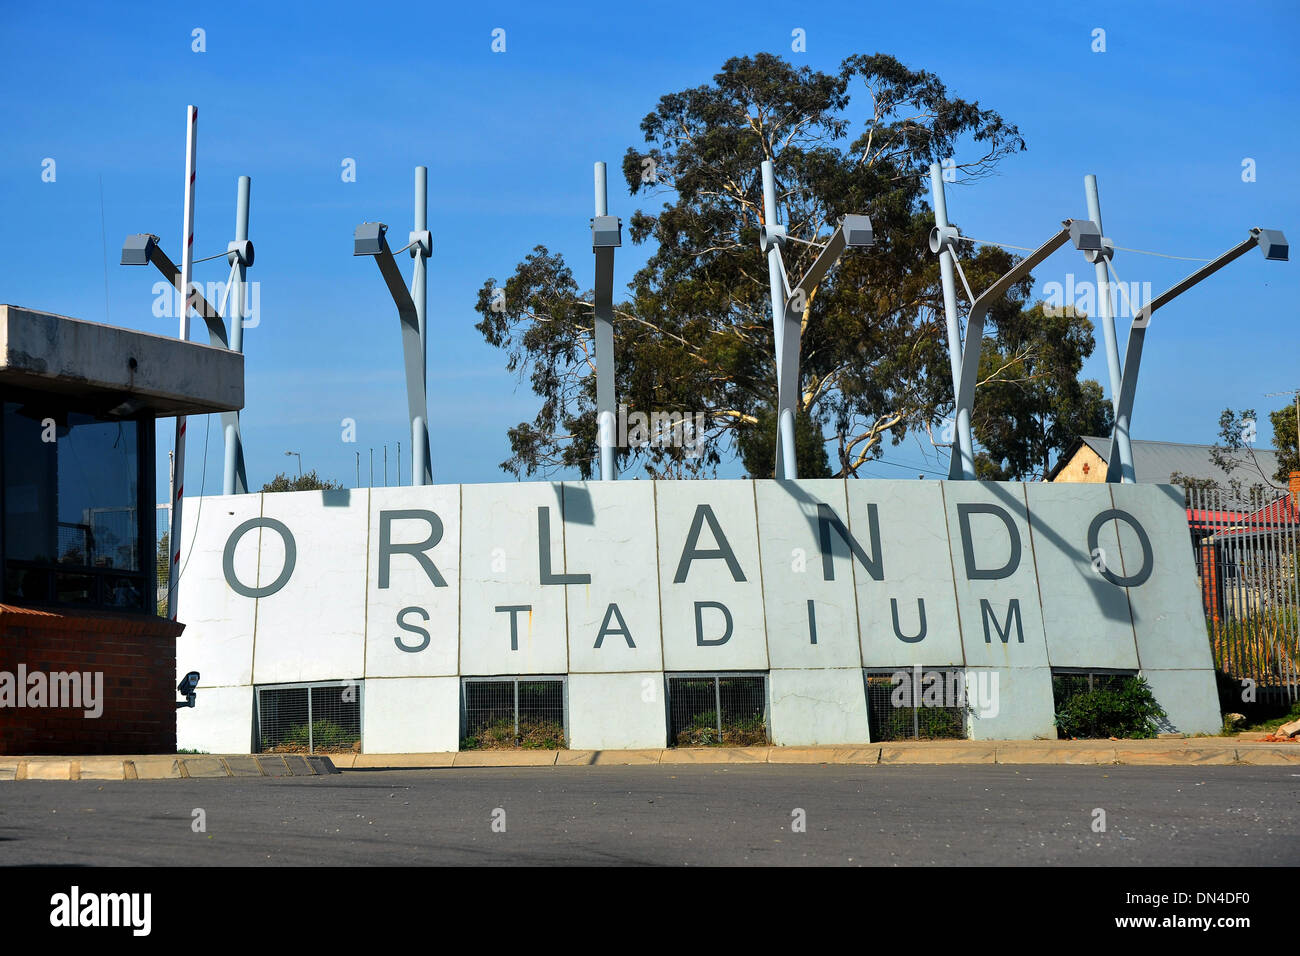 The entrance to Orlando stadium in Soweto - South Africa. Stock Photo